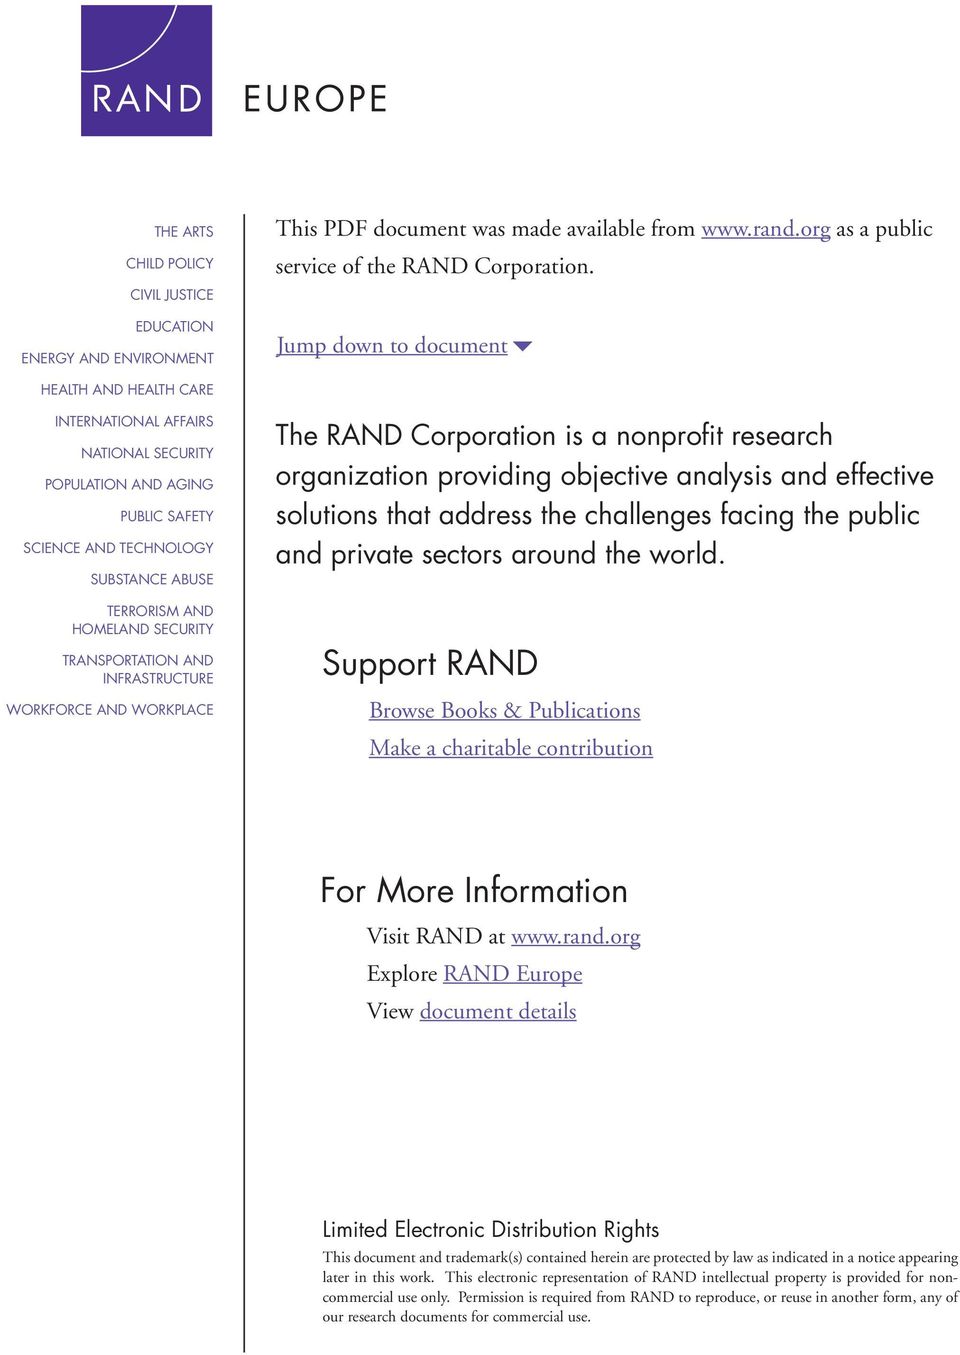 TRANSPORTATION AND INFRASTRUCTURE WORKFORCE AND WORKPLACE The RAND Corporation is a nonprofit research organization providing objective analysis and effective solutions that address the challenges